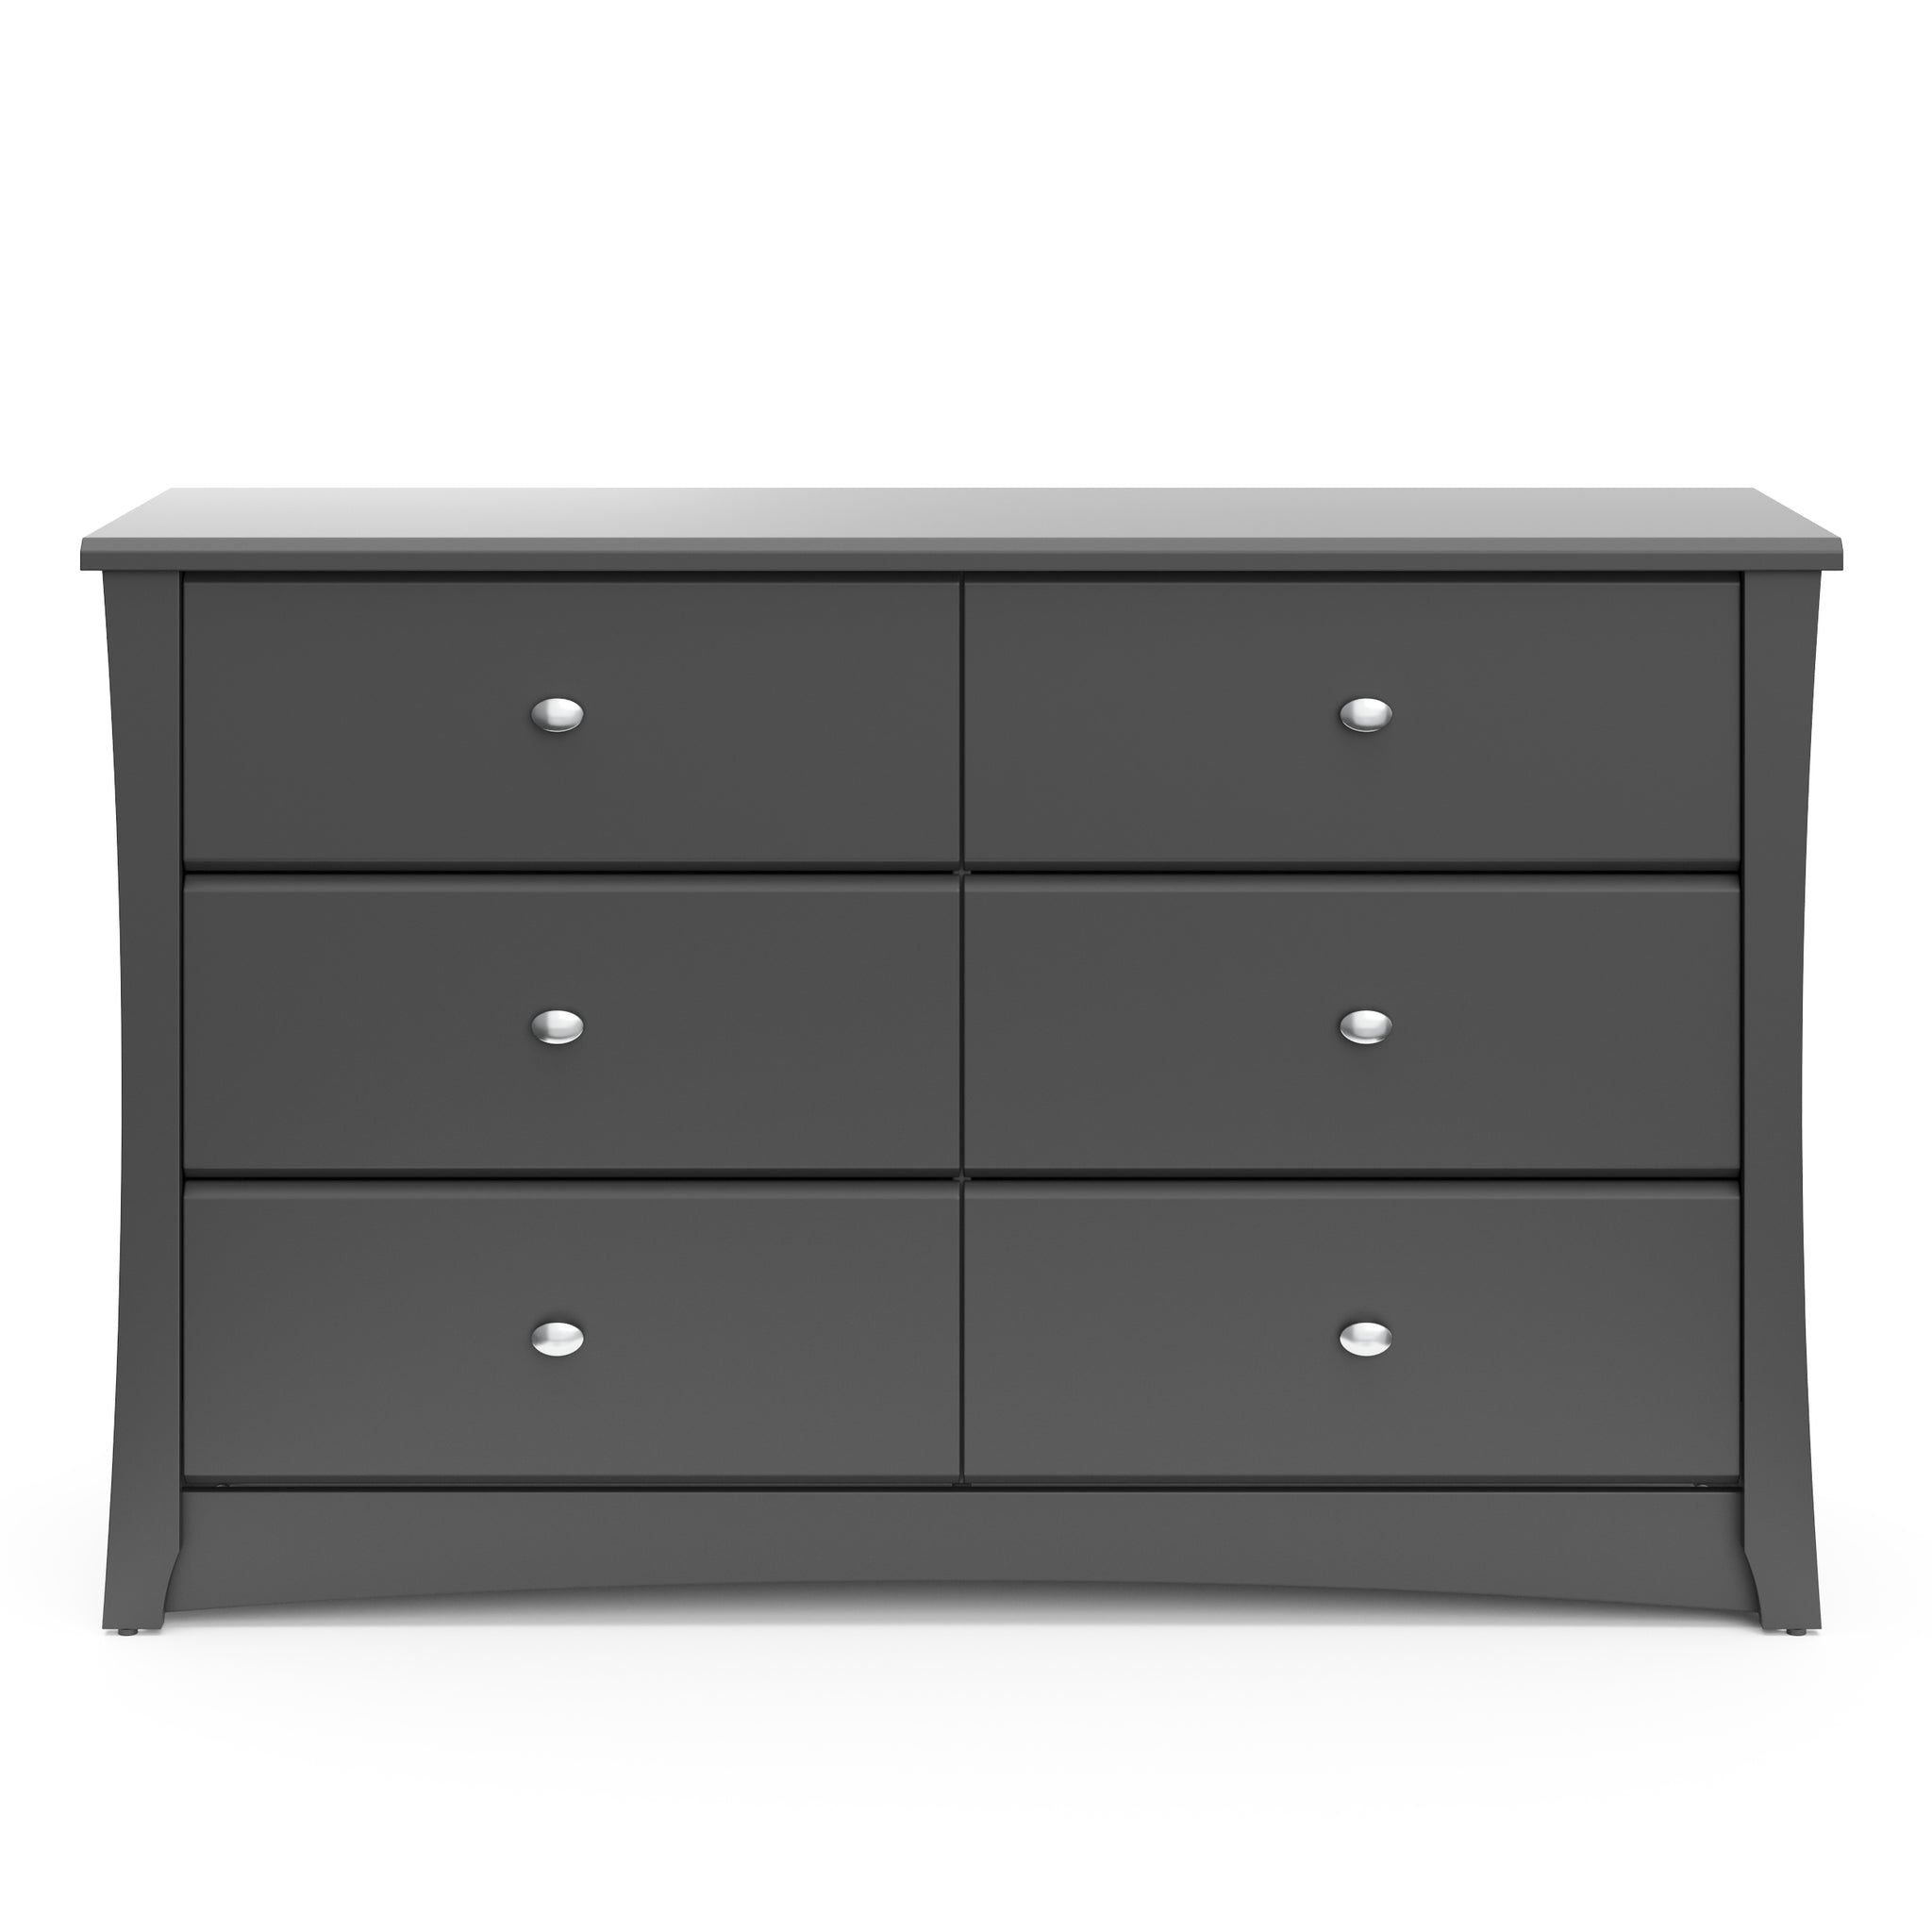 Front view of gray 6 drawer dresser